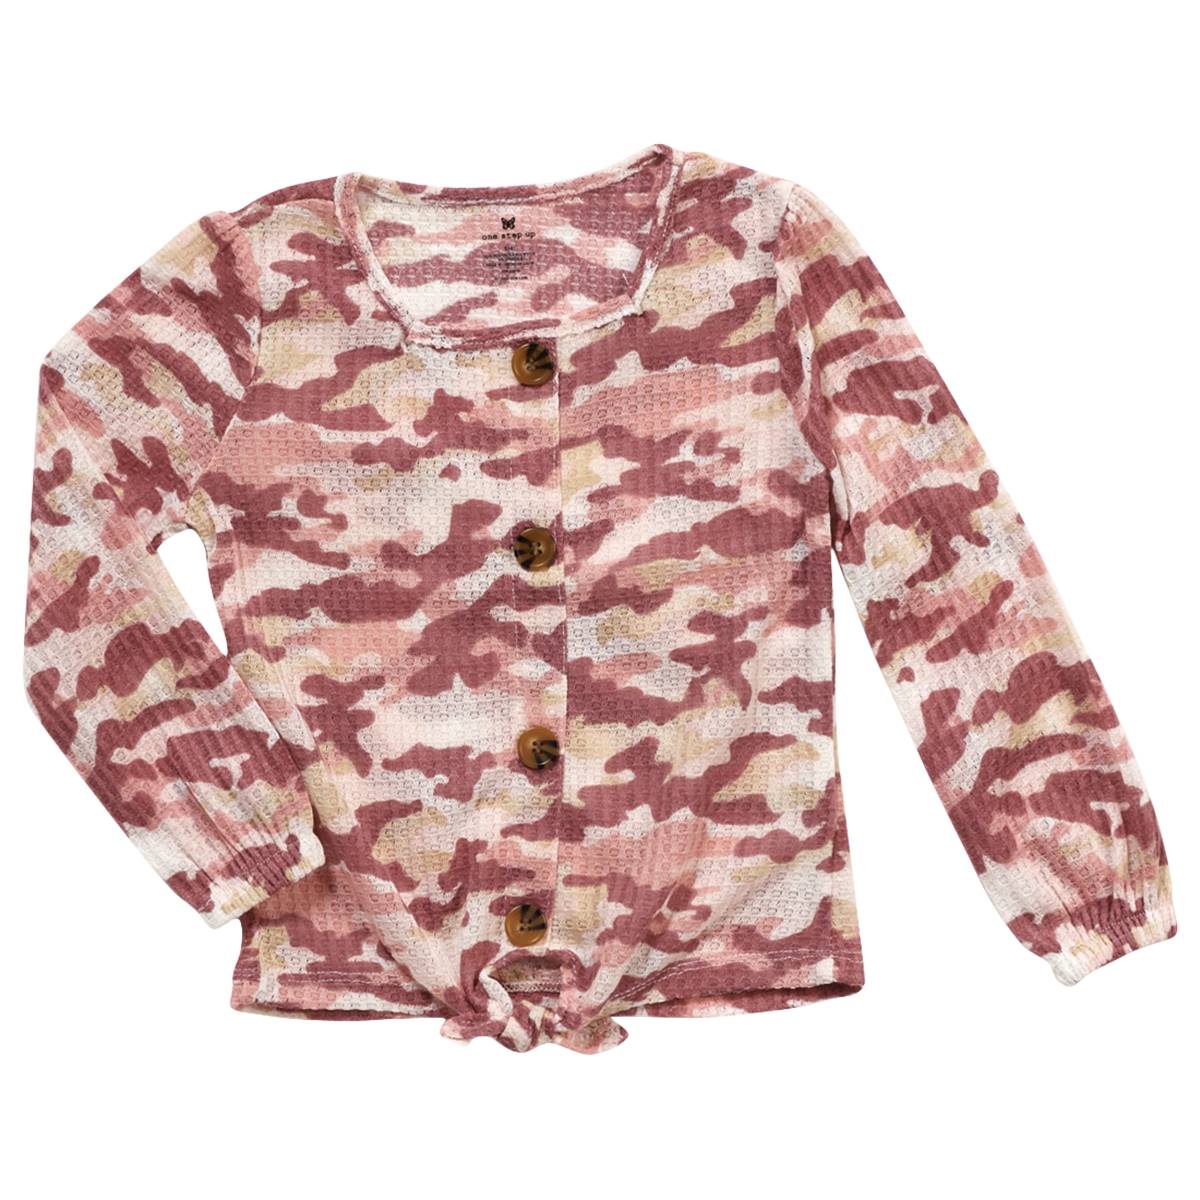 Girls (4-6x) One Step Up Tie Front Waffle Camo Top